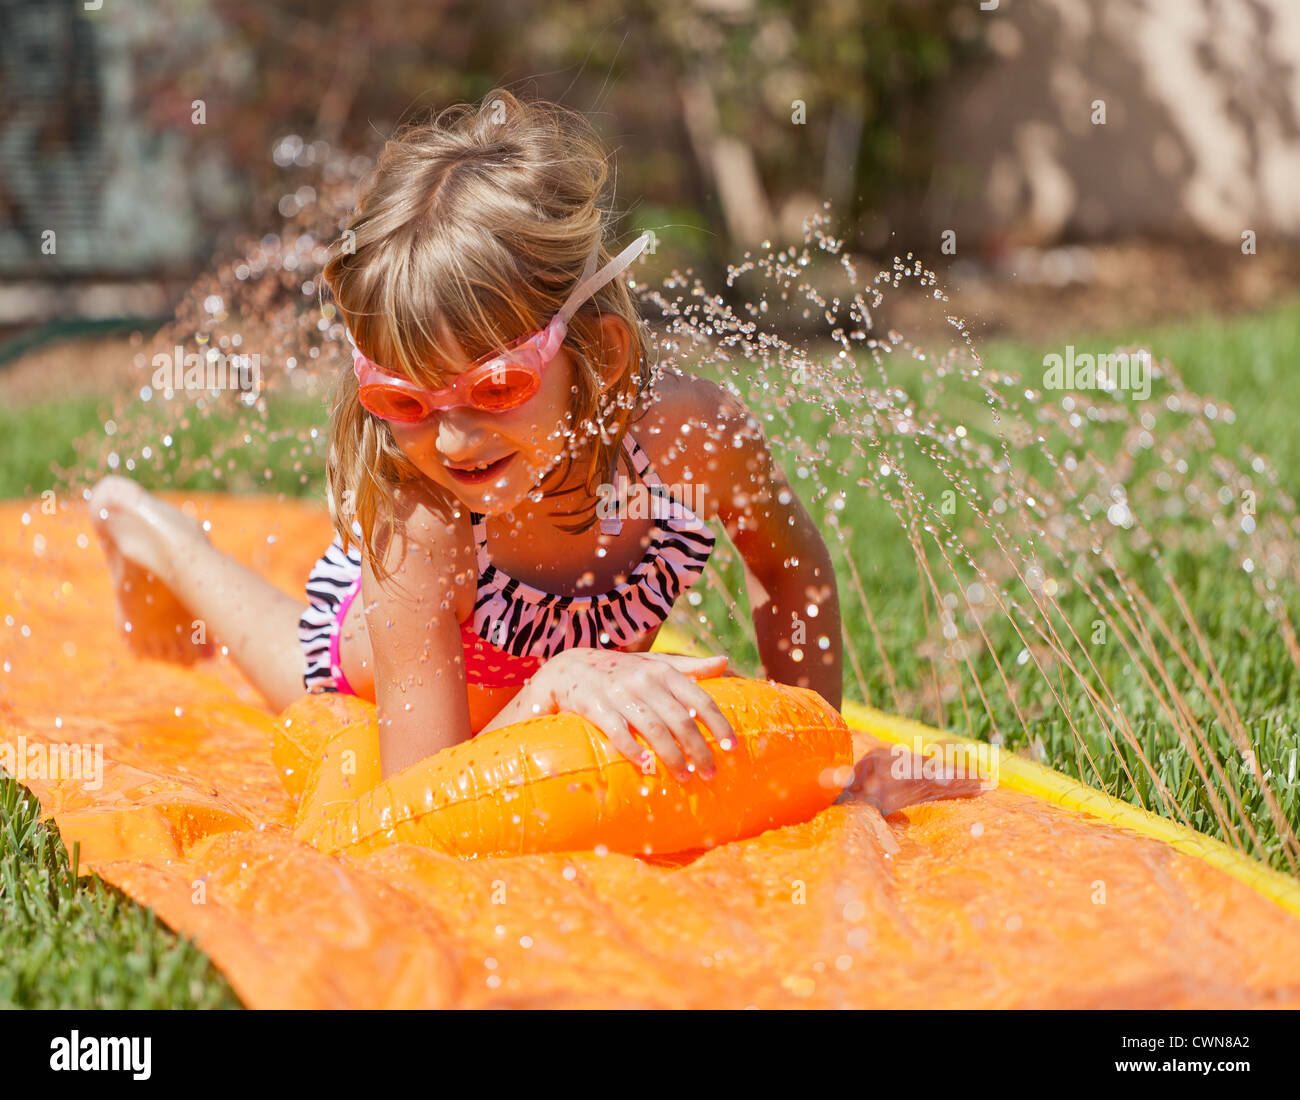 A little girl wearing goggles and bathing suit sliding on a slip and slide Stock Photo